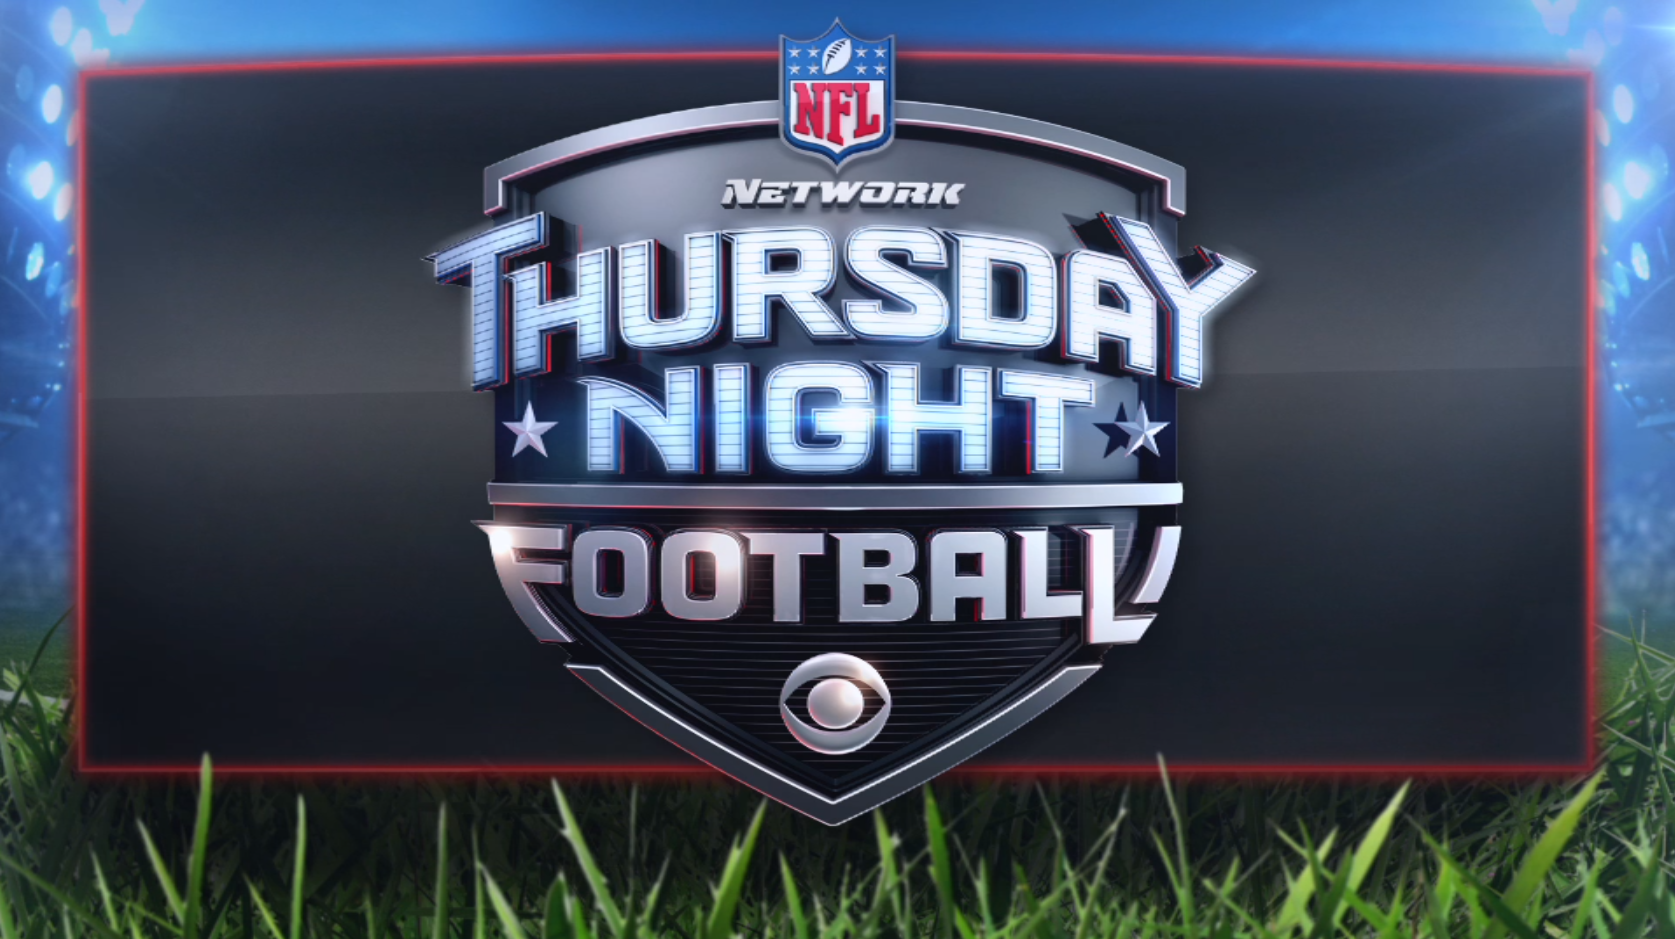 2015 NFL Thursday Night Football television schedule on CBS/NFLN